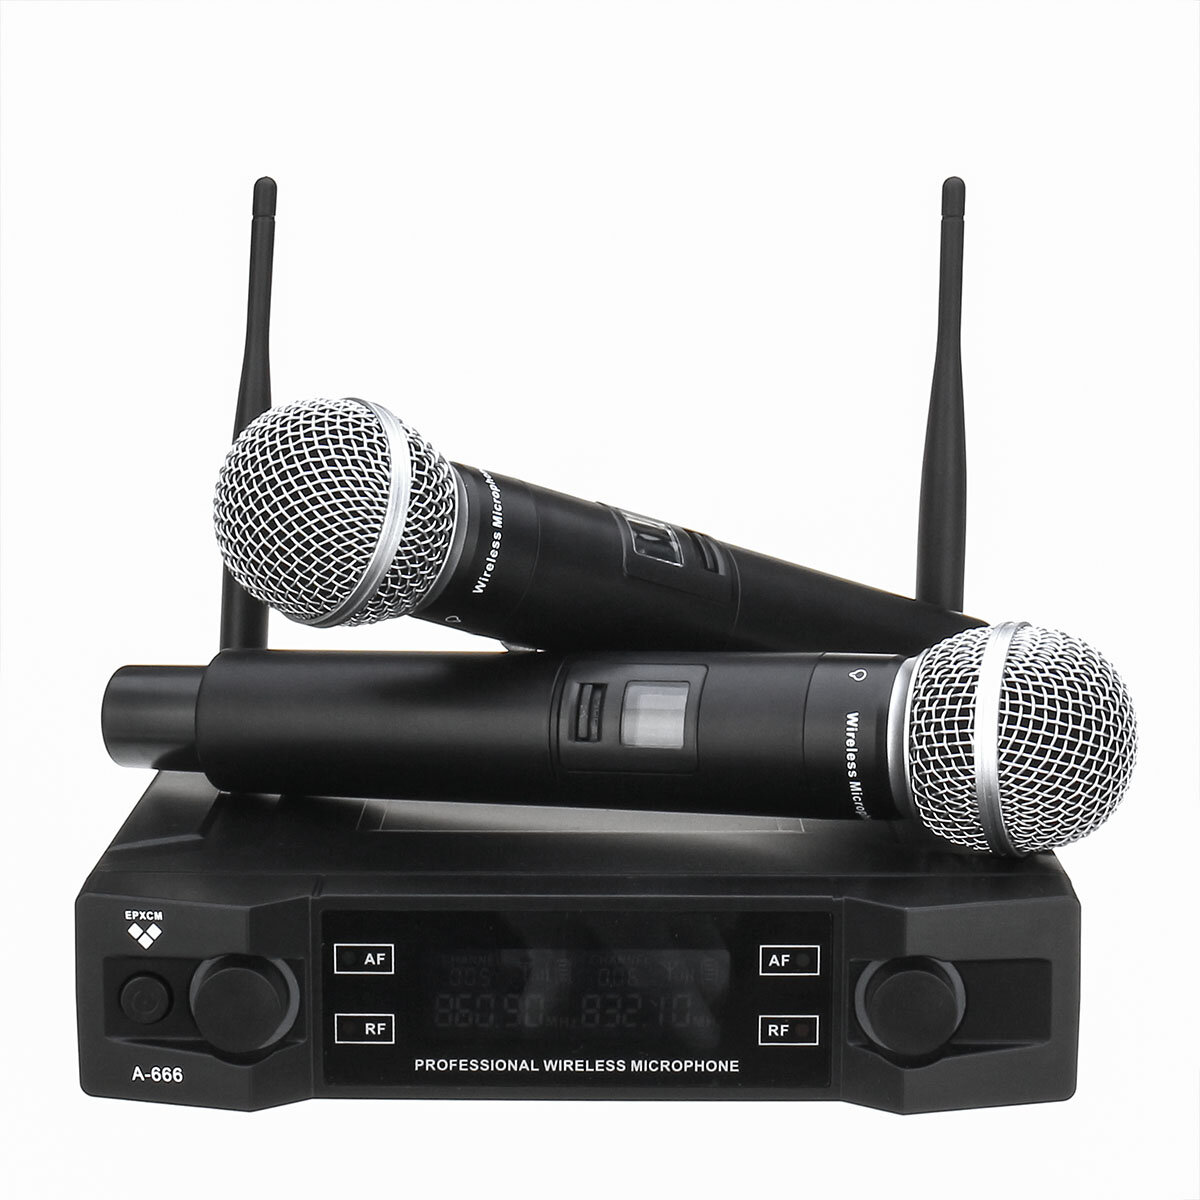 EPXCM A-666 UHF Wireless 2Ch Handheld Mic Cardioid Microphone System for Kraoke Speech Party